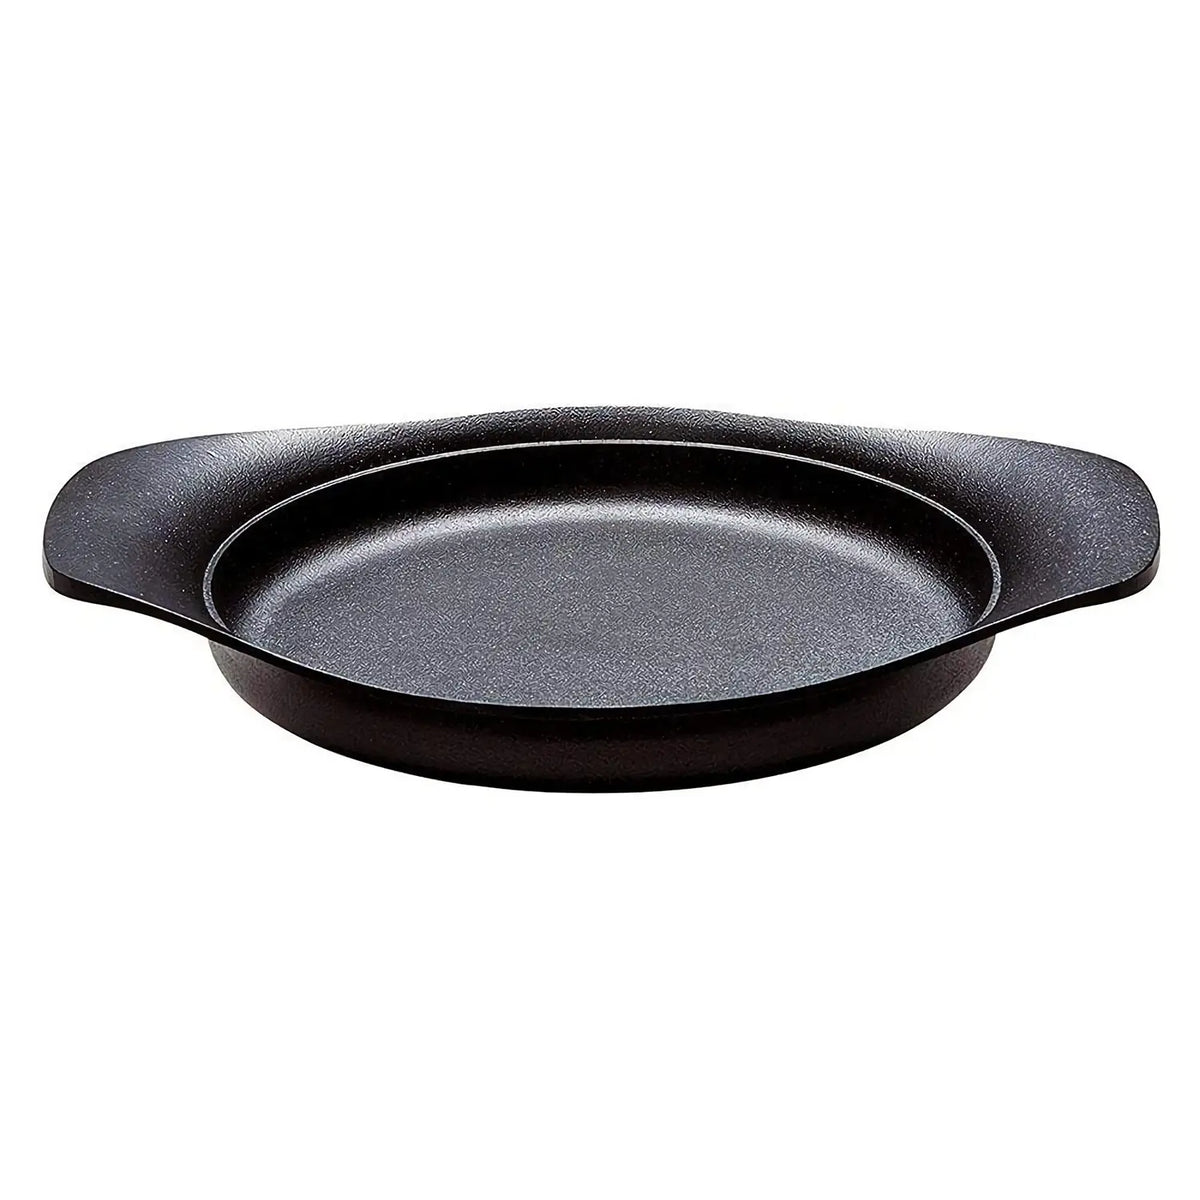 Sori Yanagi Cast Iron Induction Oil Pan Griddle 22cm with Stainless Steel Lid